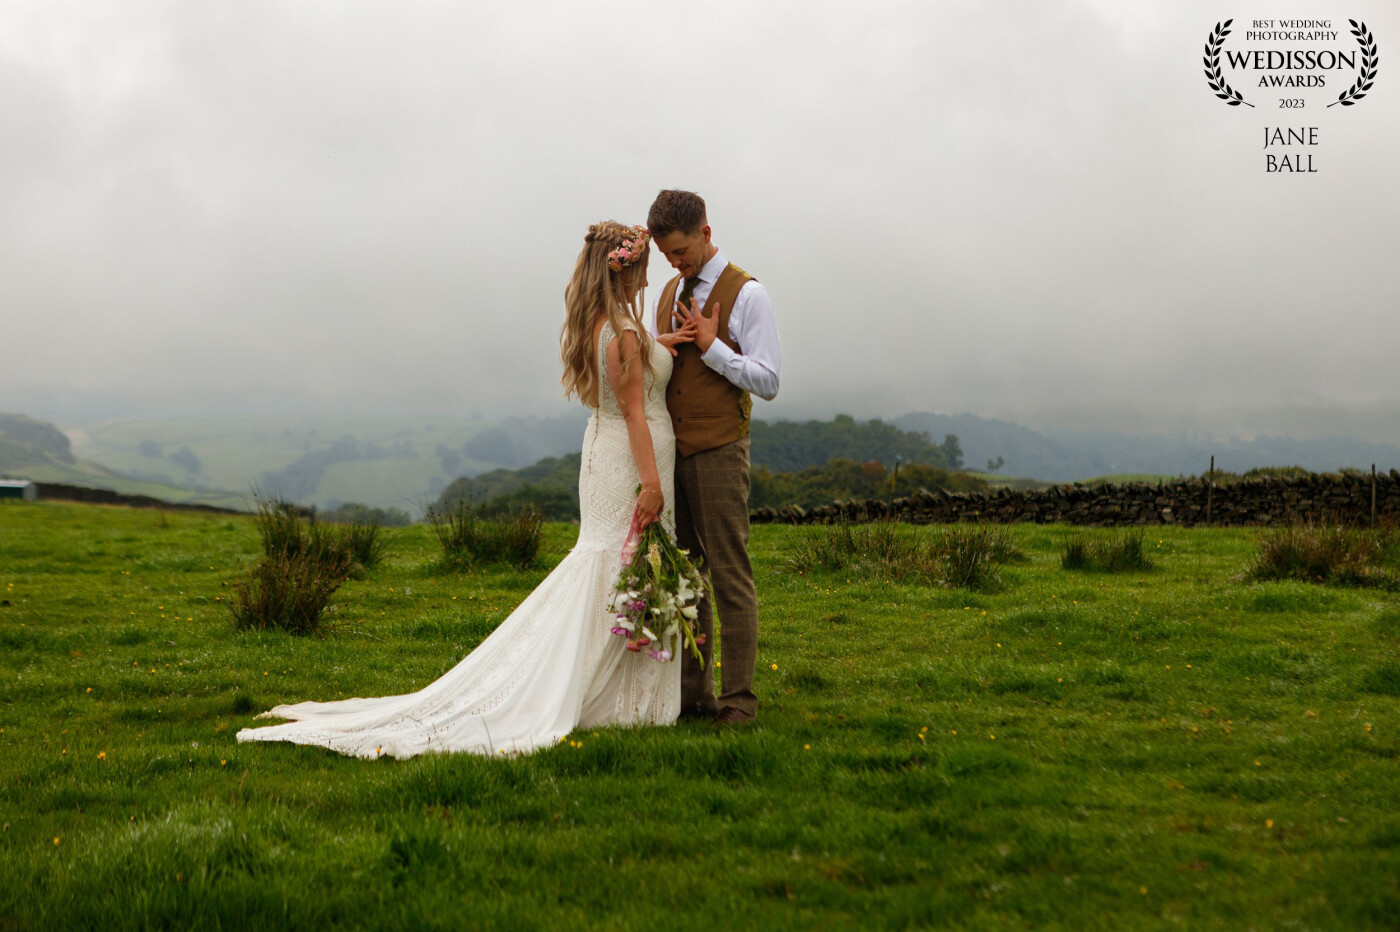 Taken at the Tarn at Fairbank Barn in the English Lake District, this photograph was one that I knew my couple wanted above all others. It was a really special few minutes were they could just relax and enjoy a bit of quiet "them" time after the ceremony. We had waited until the rain had stopped before going up to the Tarn. My bride didn't bother one bit that her dress would get wet and very dirty. She just wanted to be with her new husband at a place she loved.